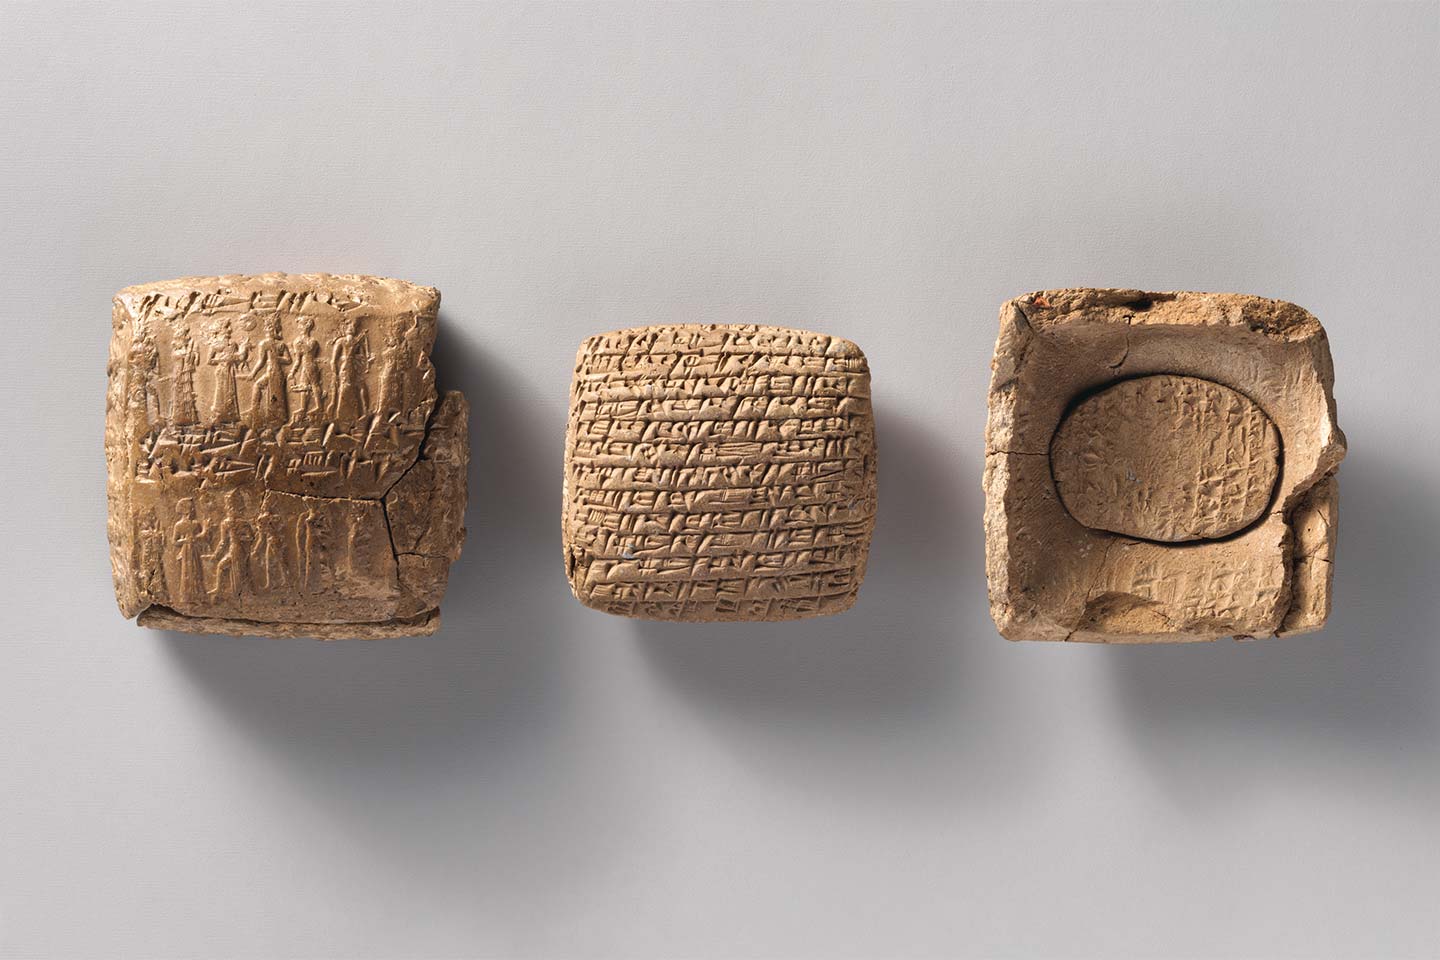 Clay cuneiform tablet with a small second tablet